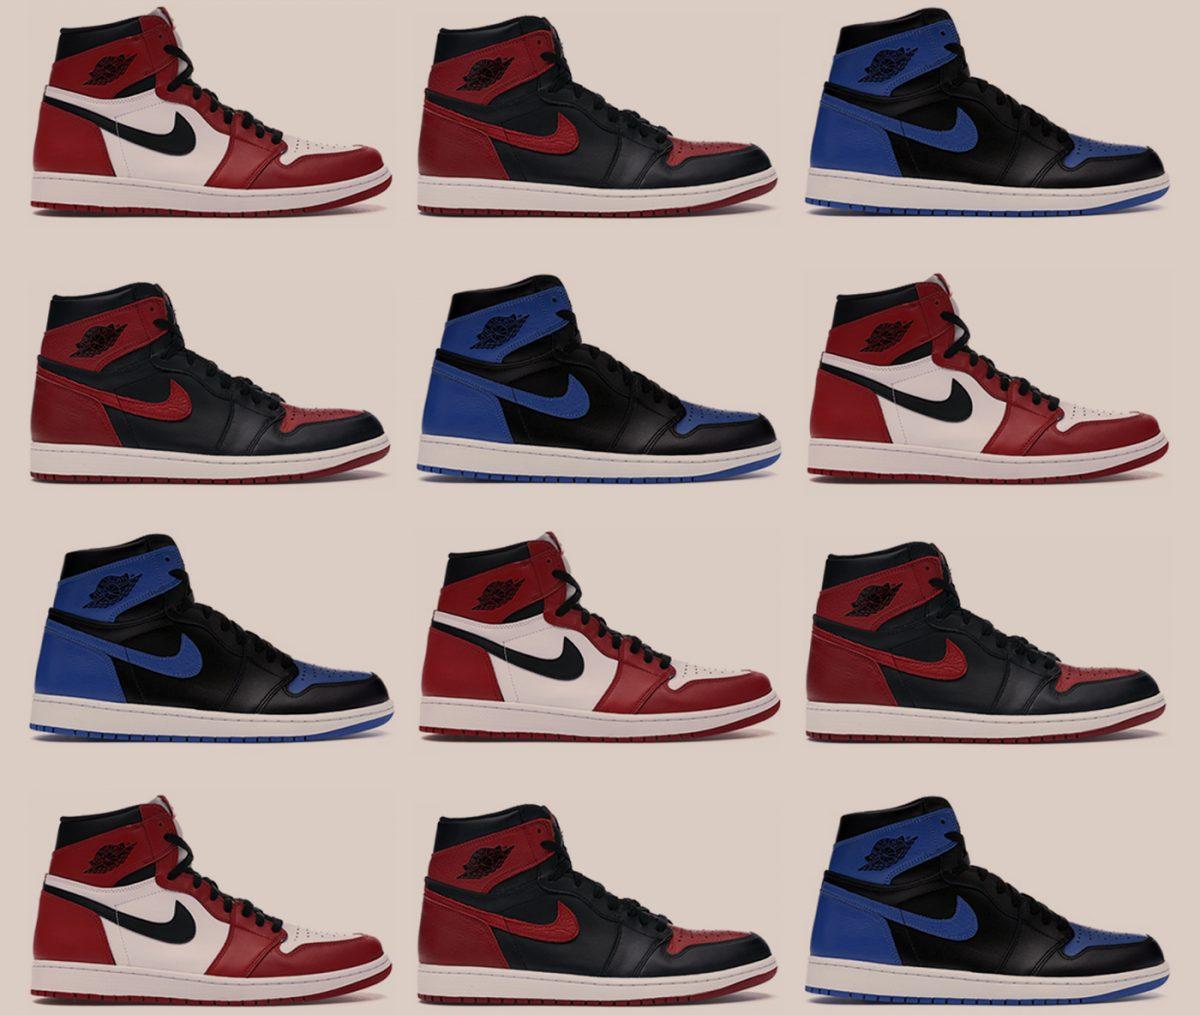 Here's What a Supreme x Air Jordan 1 Could Have Looked Like